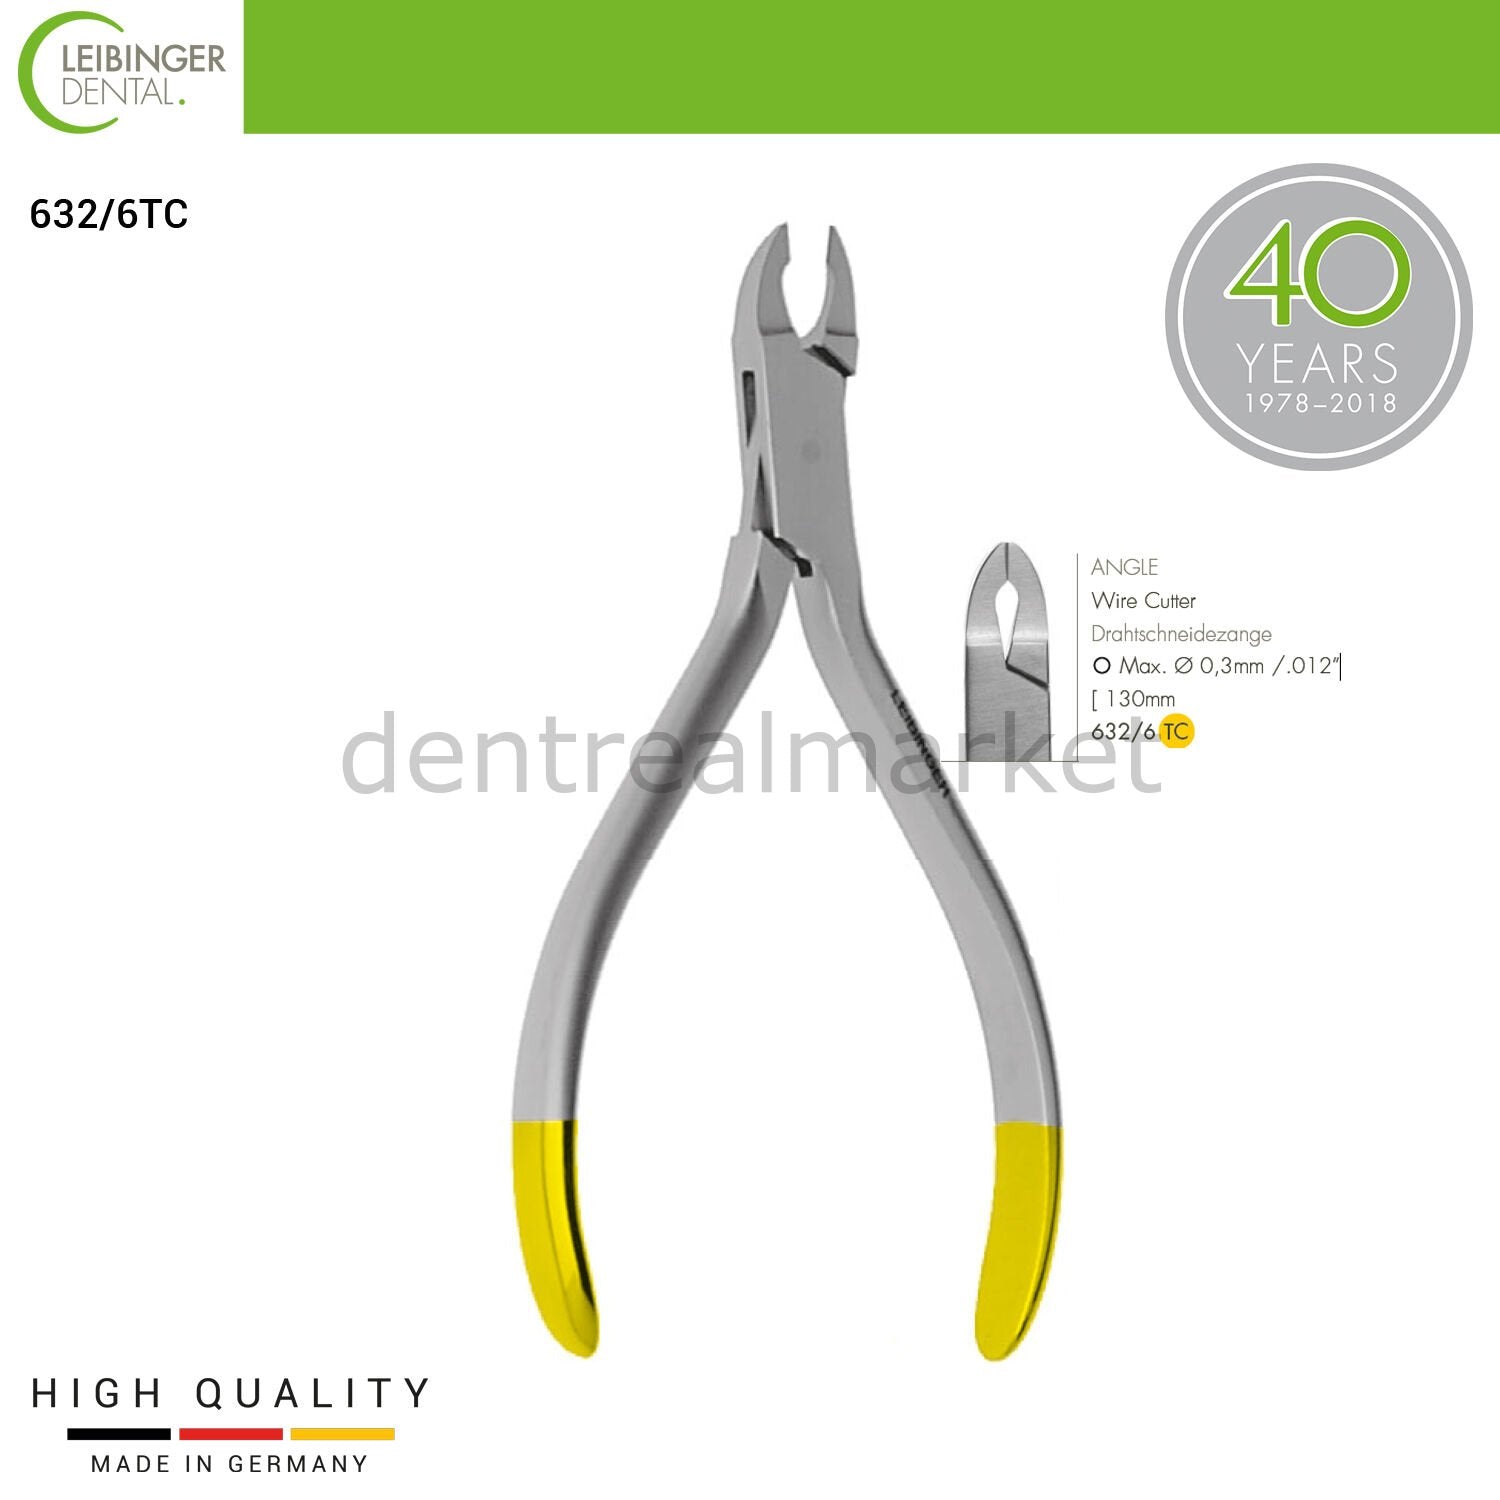 DentrealStore - Leibinger Orthodontic Angle Wire Cutter Tc - Angle Wire Cutter - 130 mm